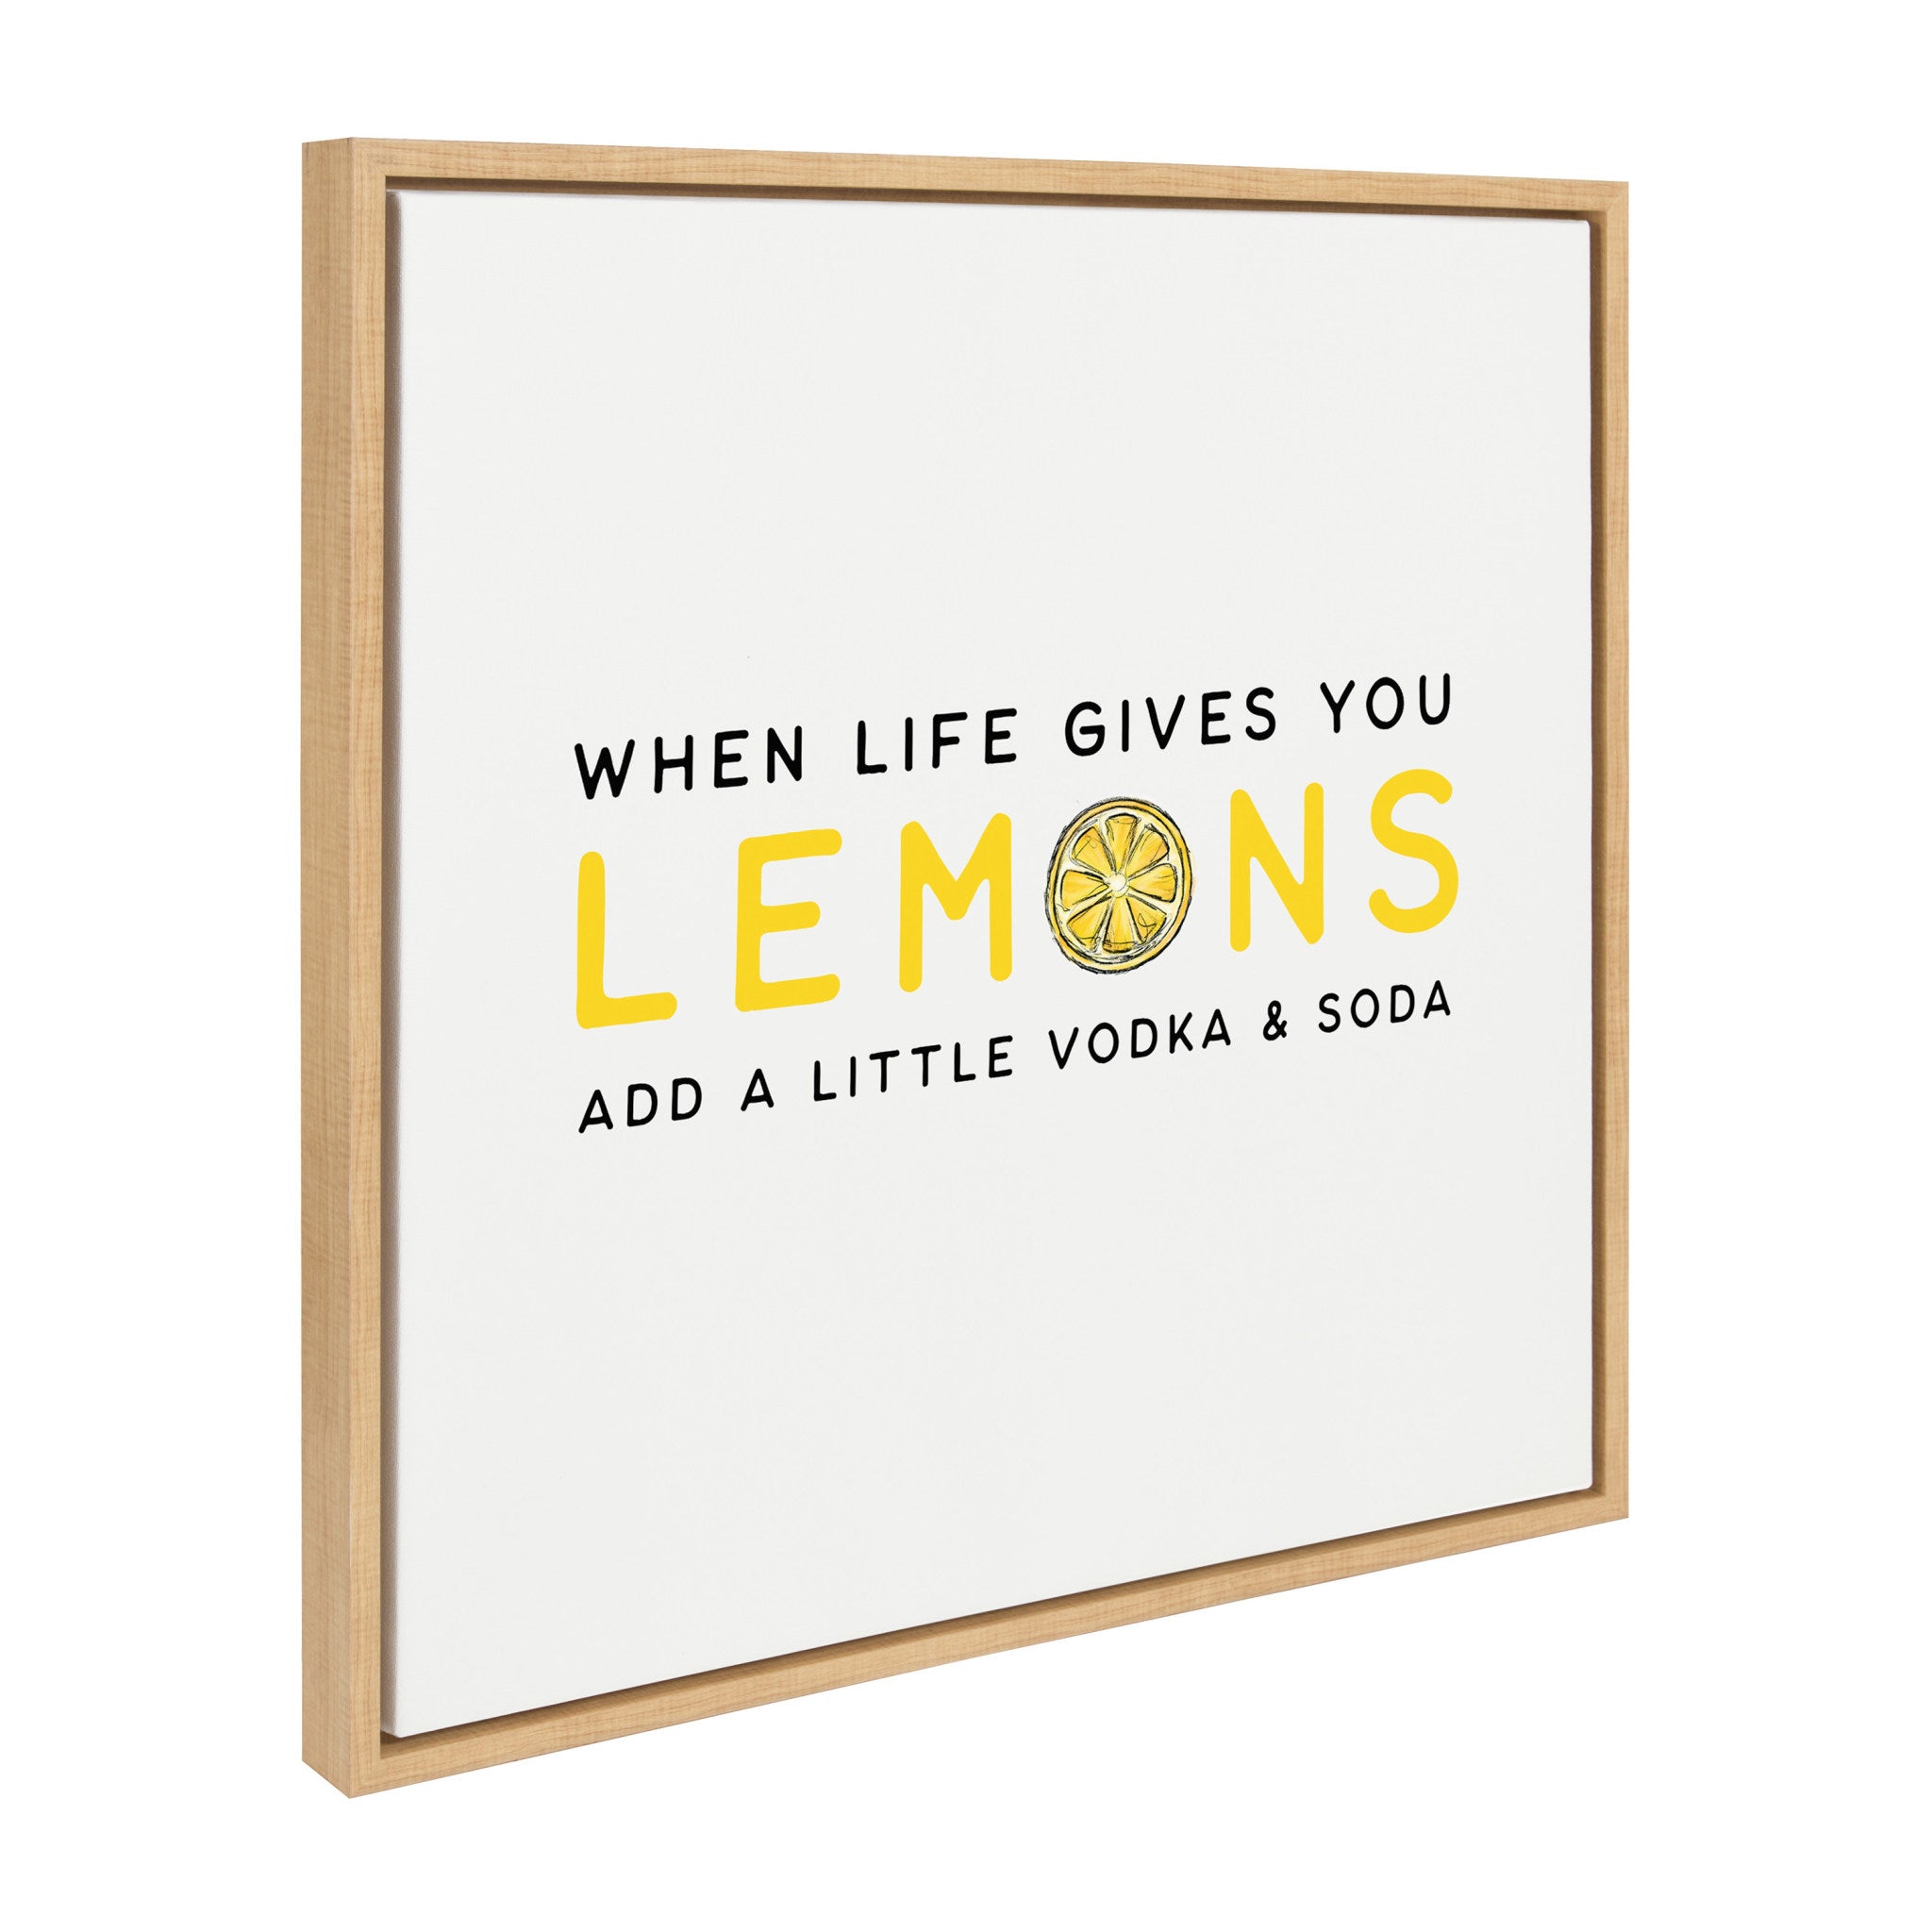 Sylvie Cocktail Quote Lemons Add Vodka and Soda Framed Canvas by The Creative Bunch Studio